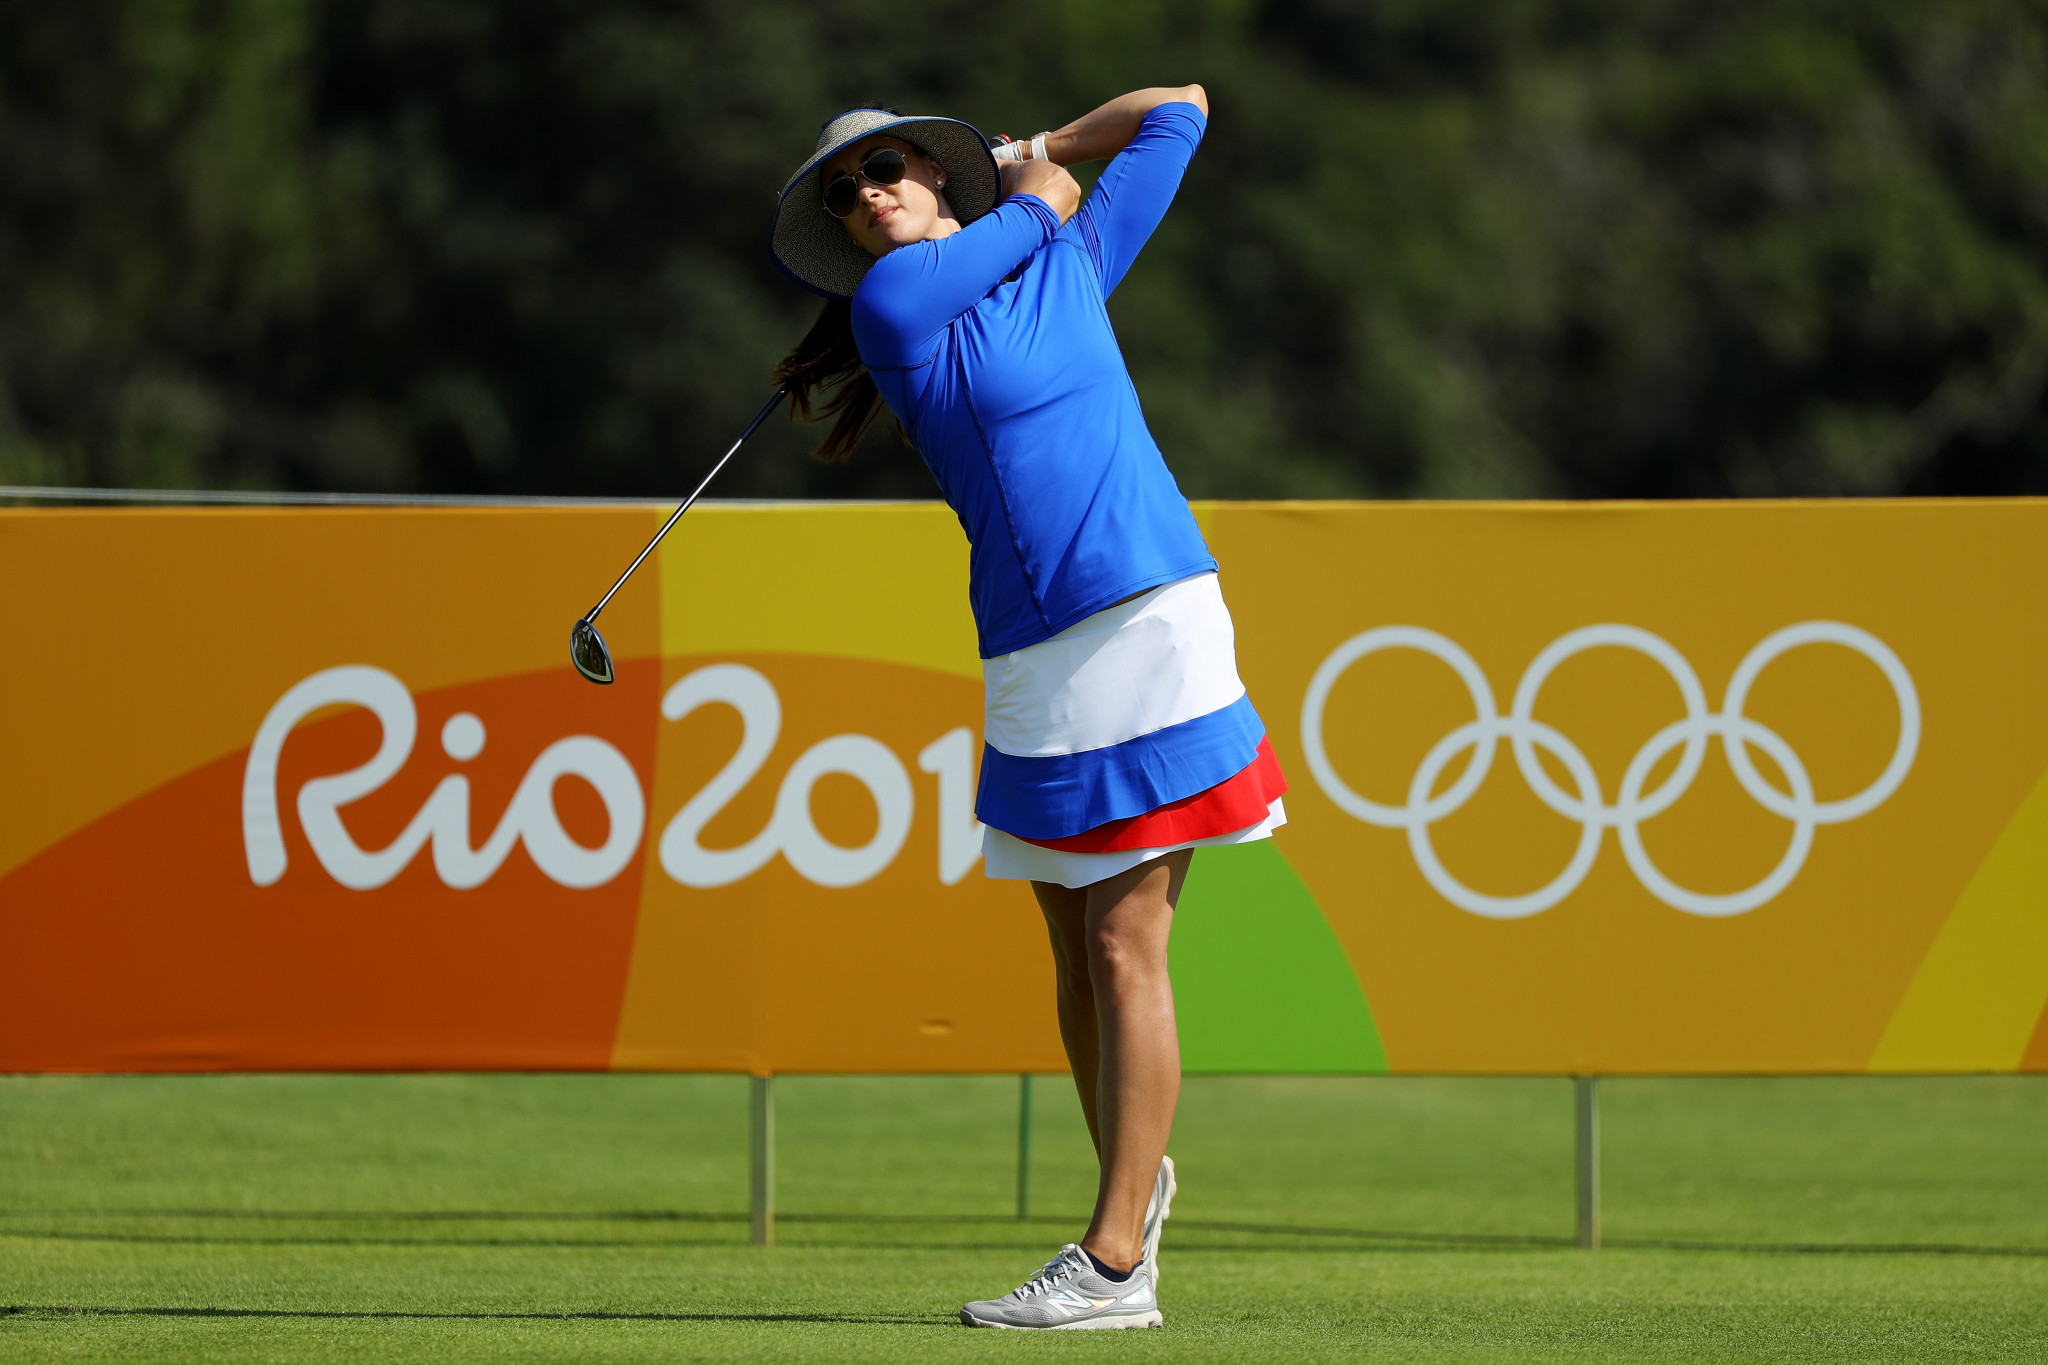 Maria Verchenova, Russia's only representative in the Olympic golf tournament at RIo 2016, hit a hole-in-one in the fourth round as she set a course record of 62 to finish 15th ©Getty Images